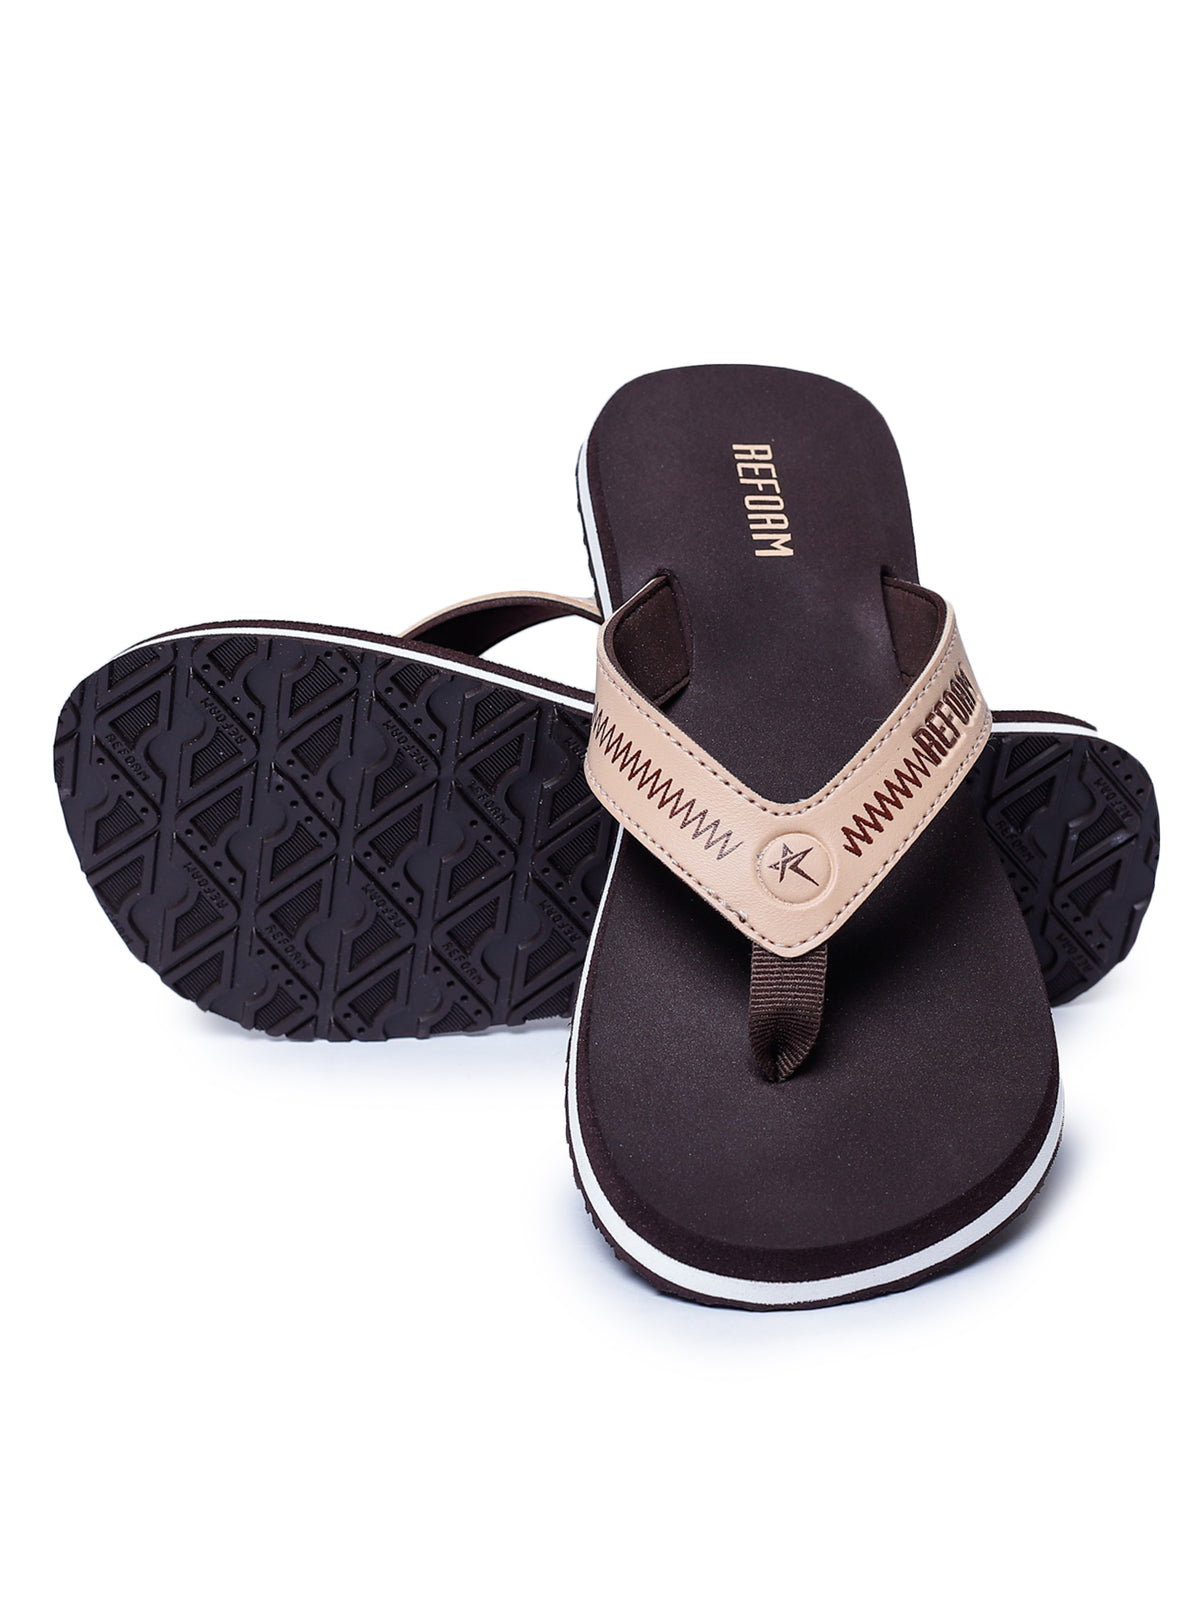 Brown Solid Rubber Slip On Casual Slippers For Women